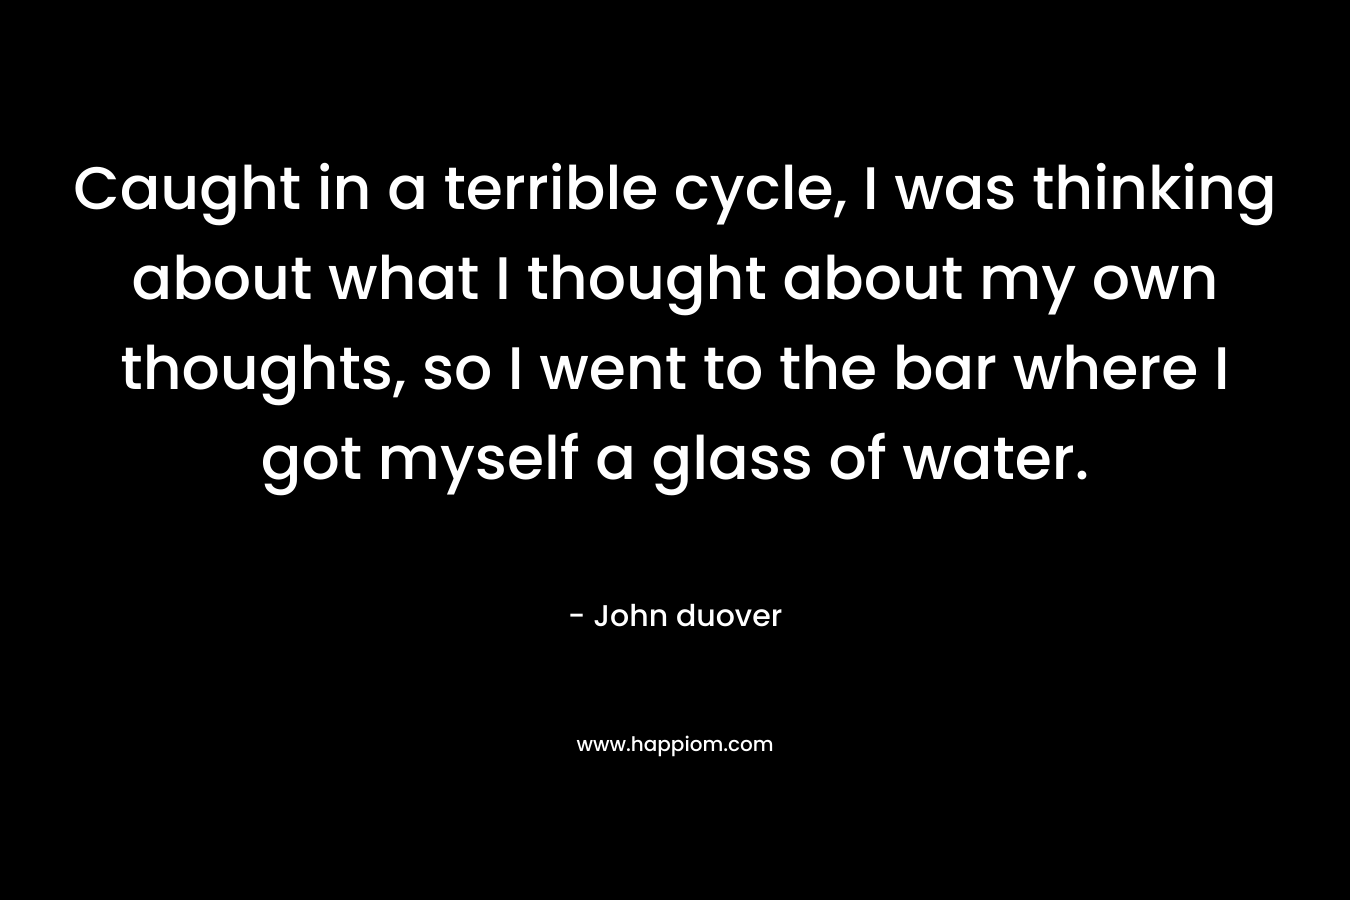 Caught in a terrible cycle, I was thinking about what I thought about my own thoughts, so I went to the bar where I got myself a glass of water.